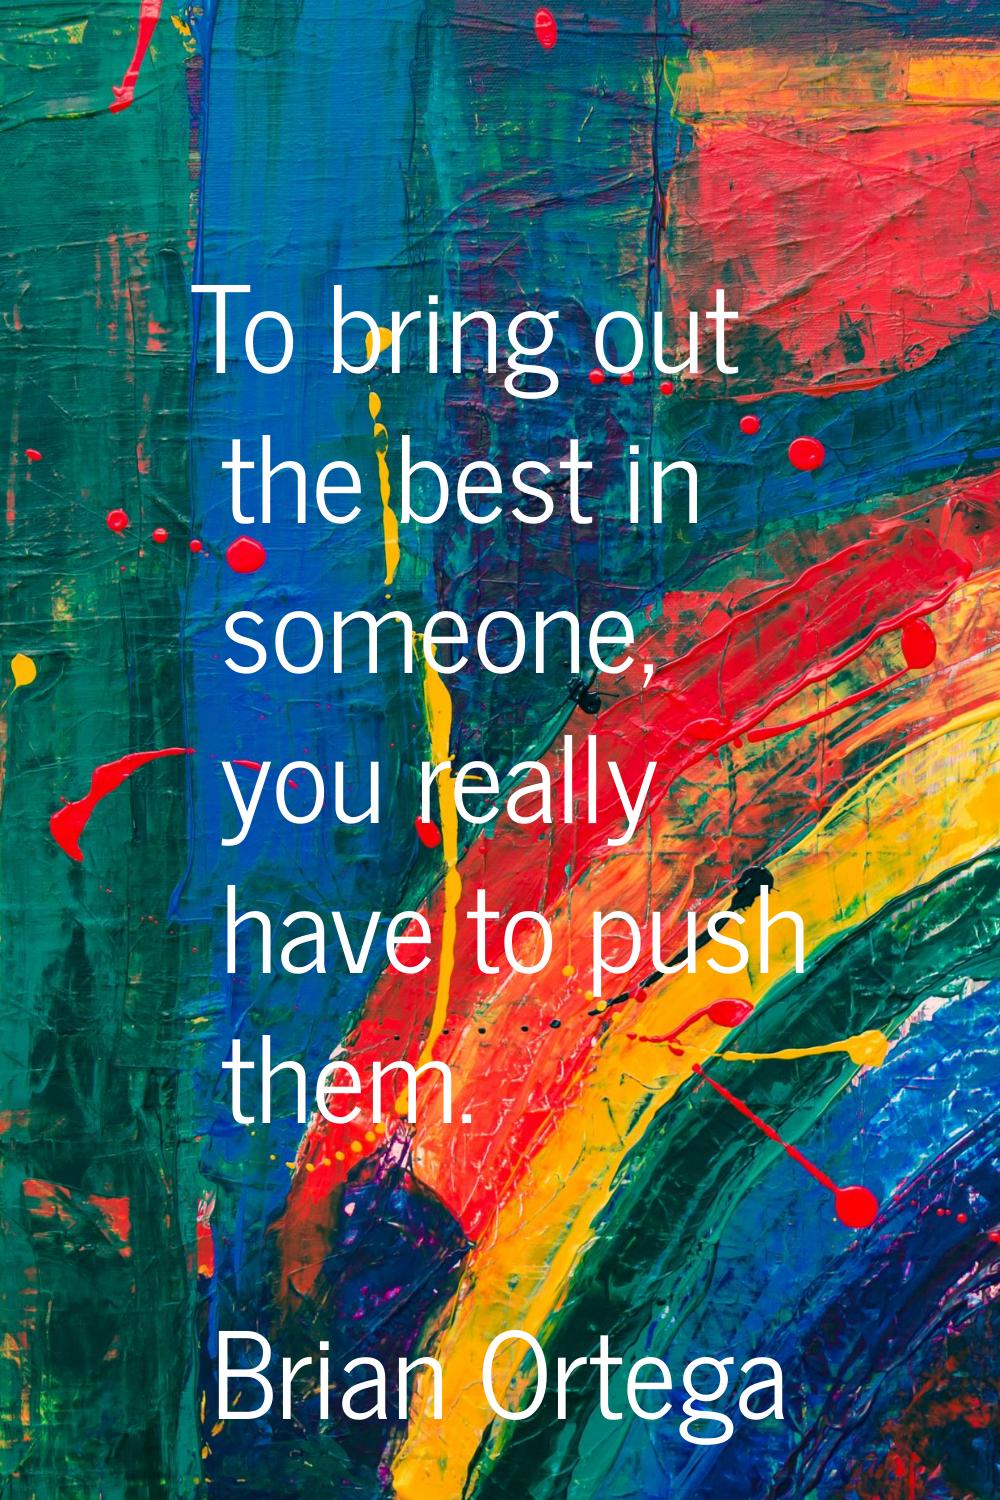 To bring out the best in someone, you really have to push them.